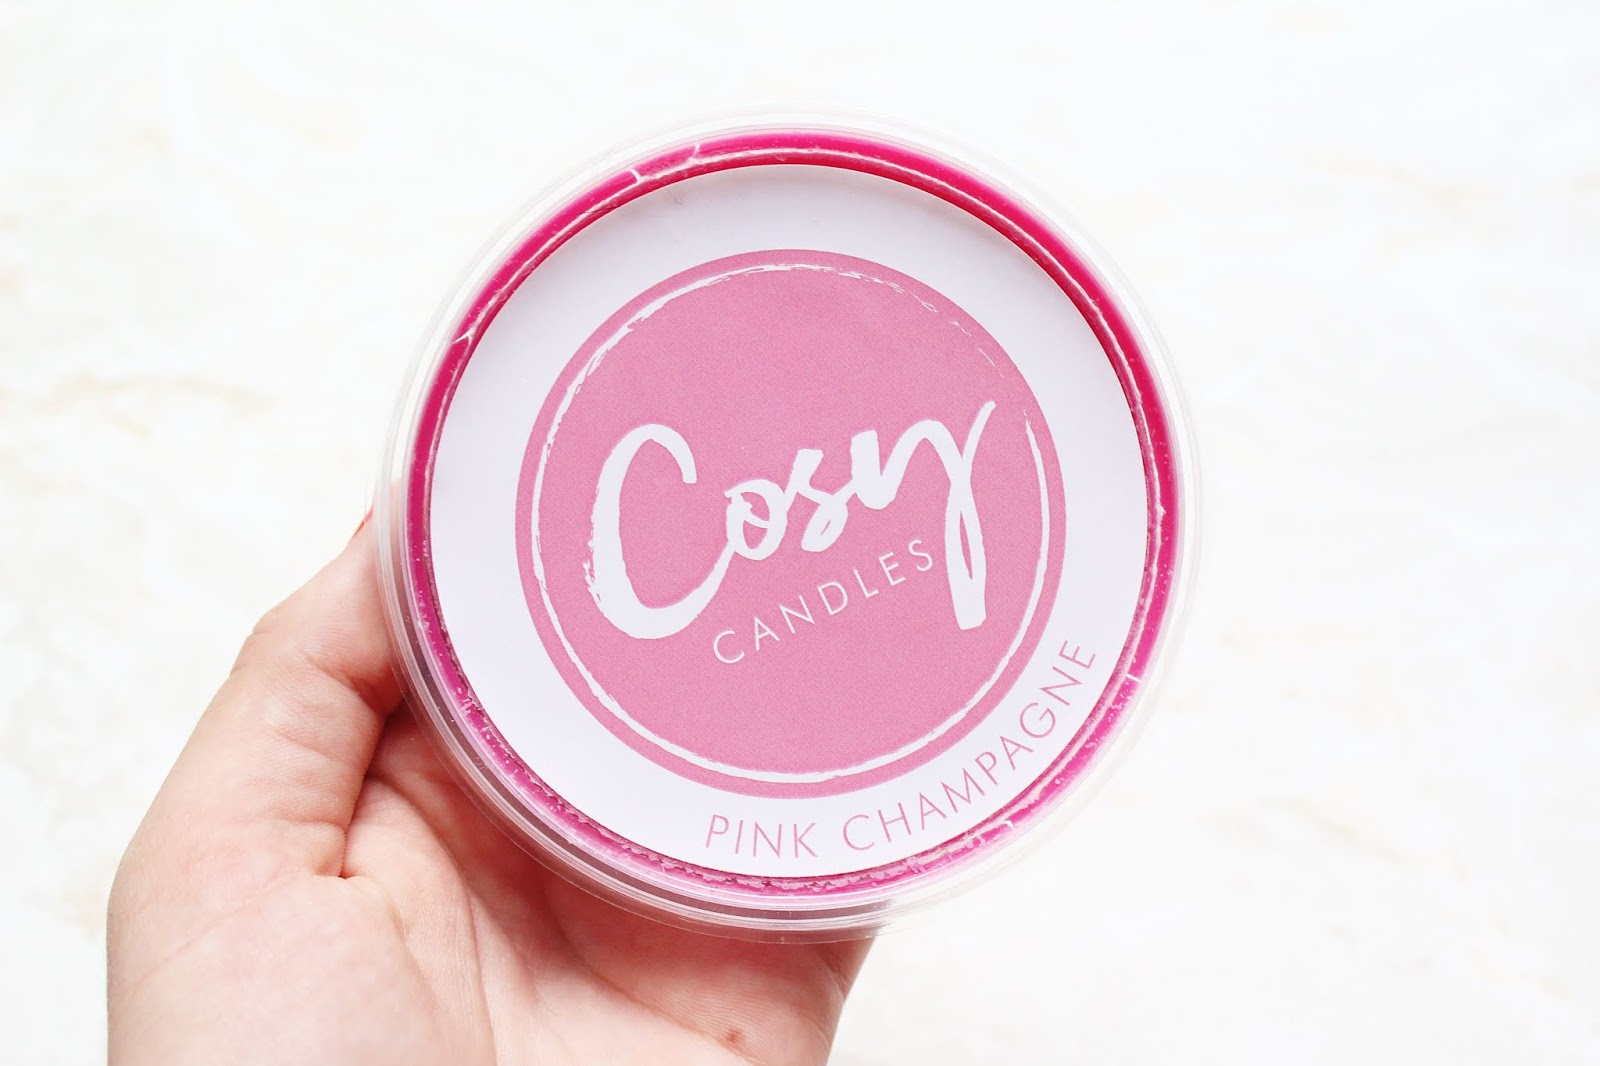 Cosy Candles Subscription Box Review 